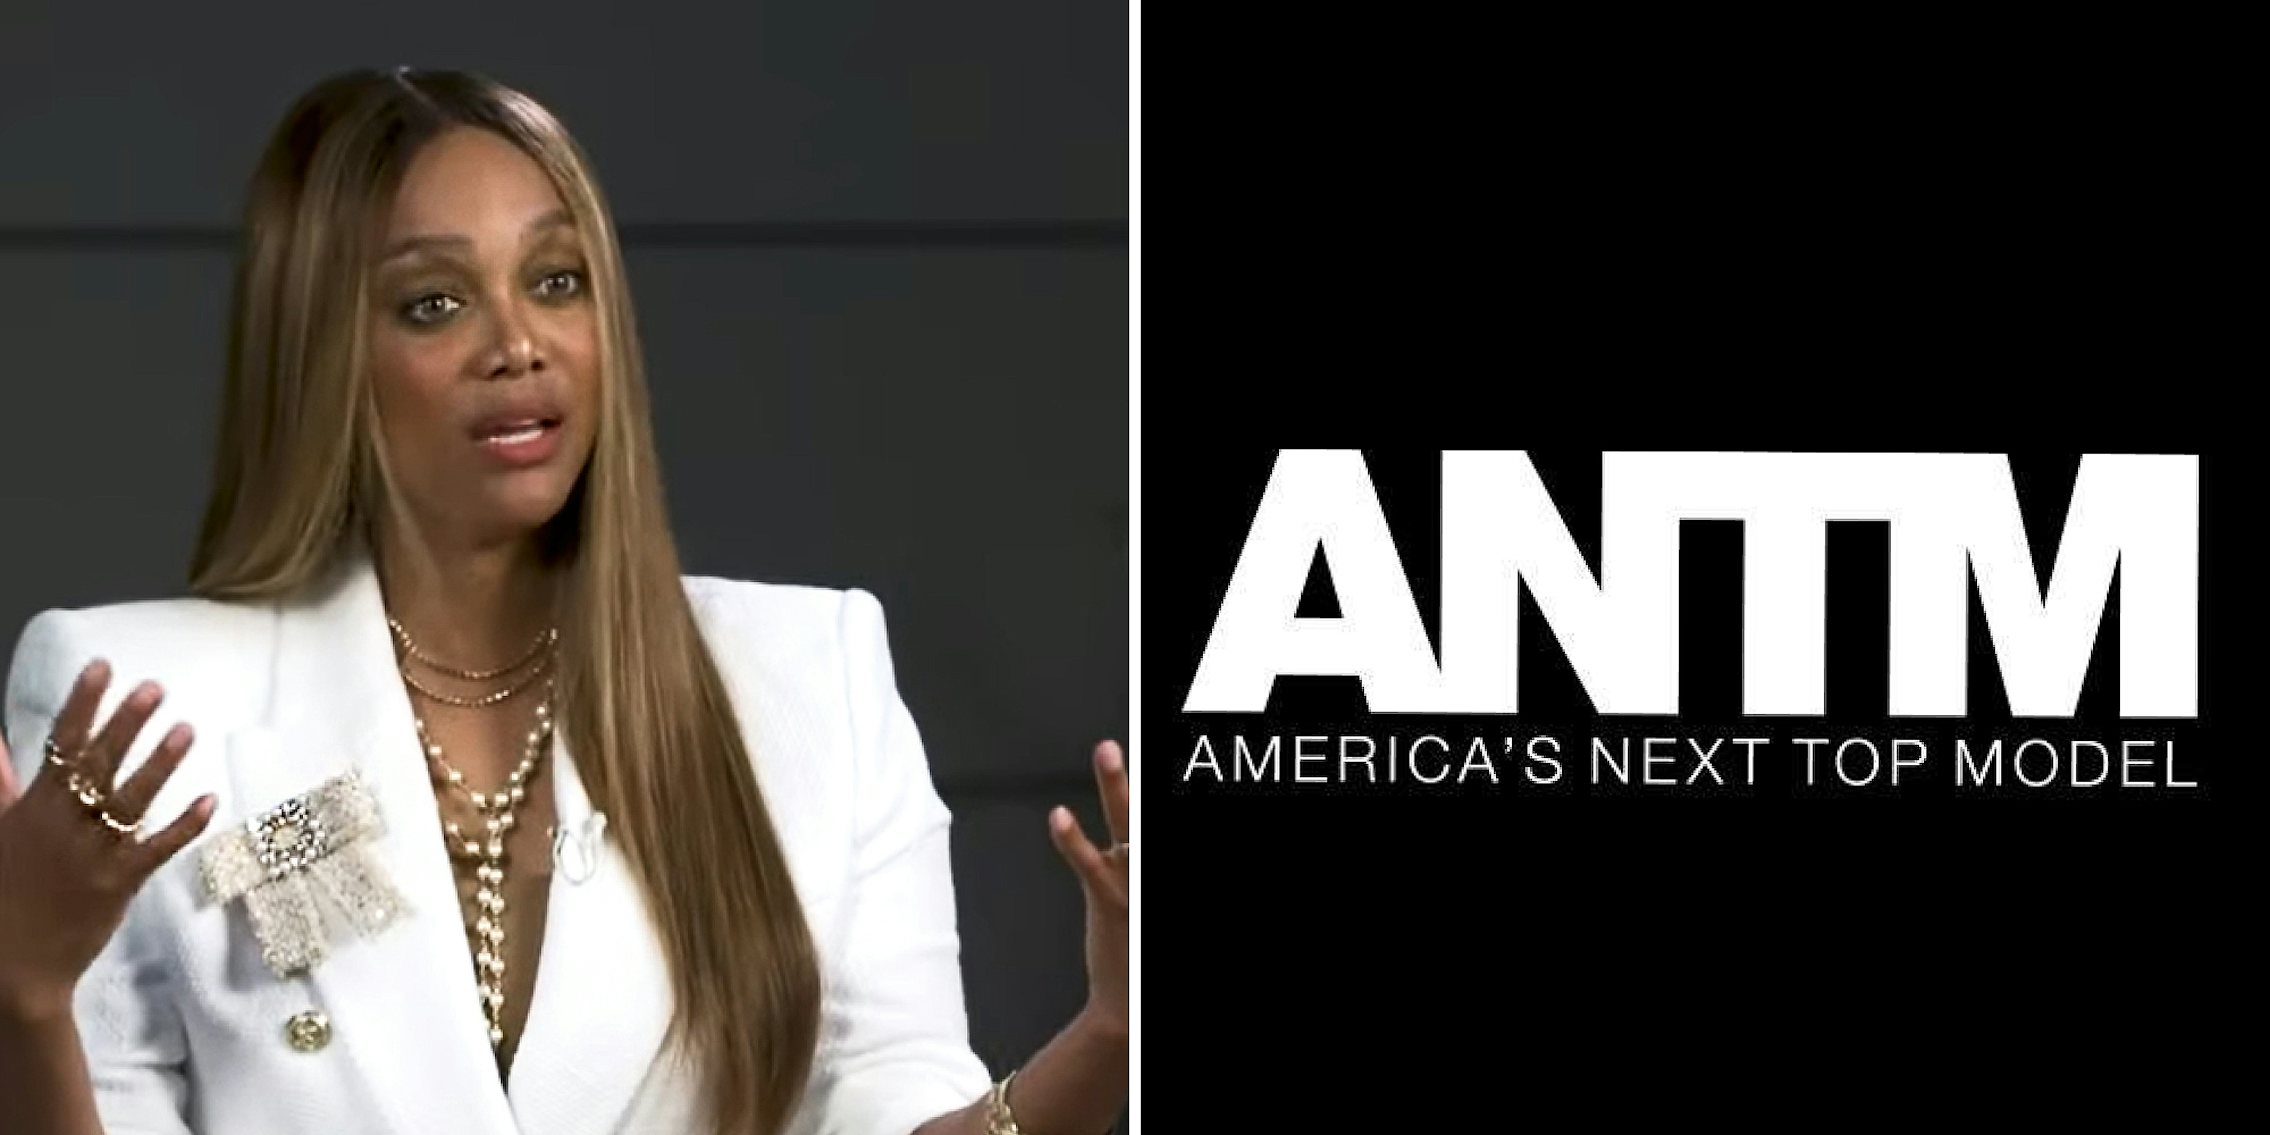 Trya Banks speaking hands out (l) America's Next Top Model logo white over black background (r)